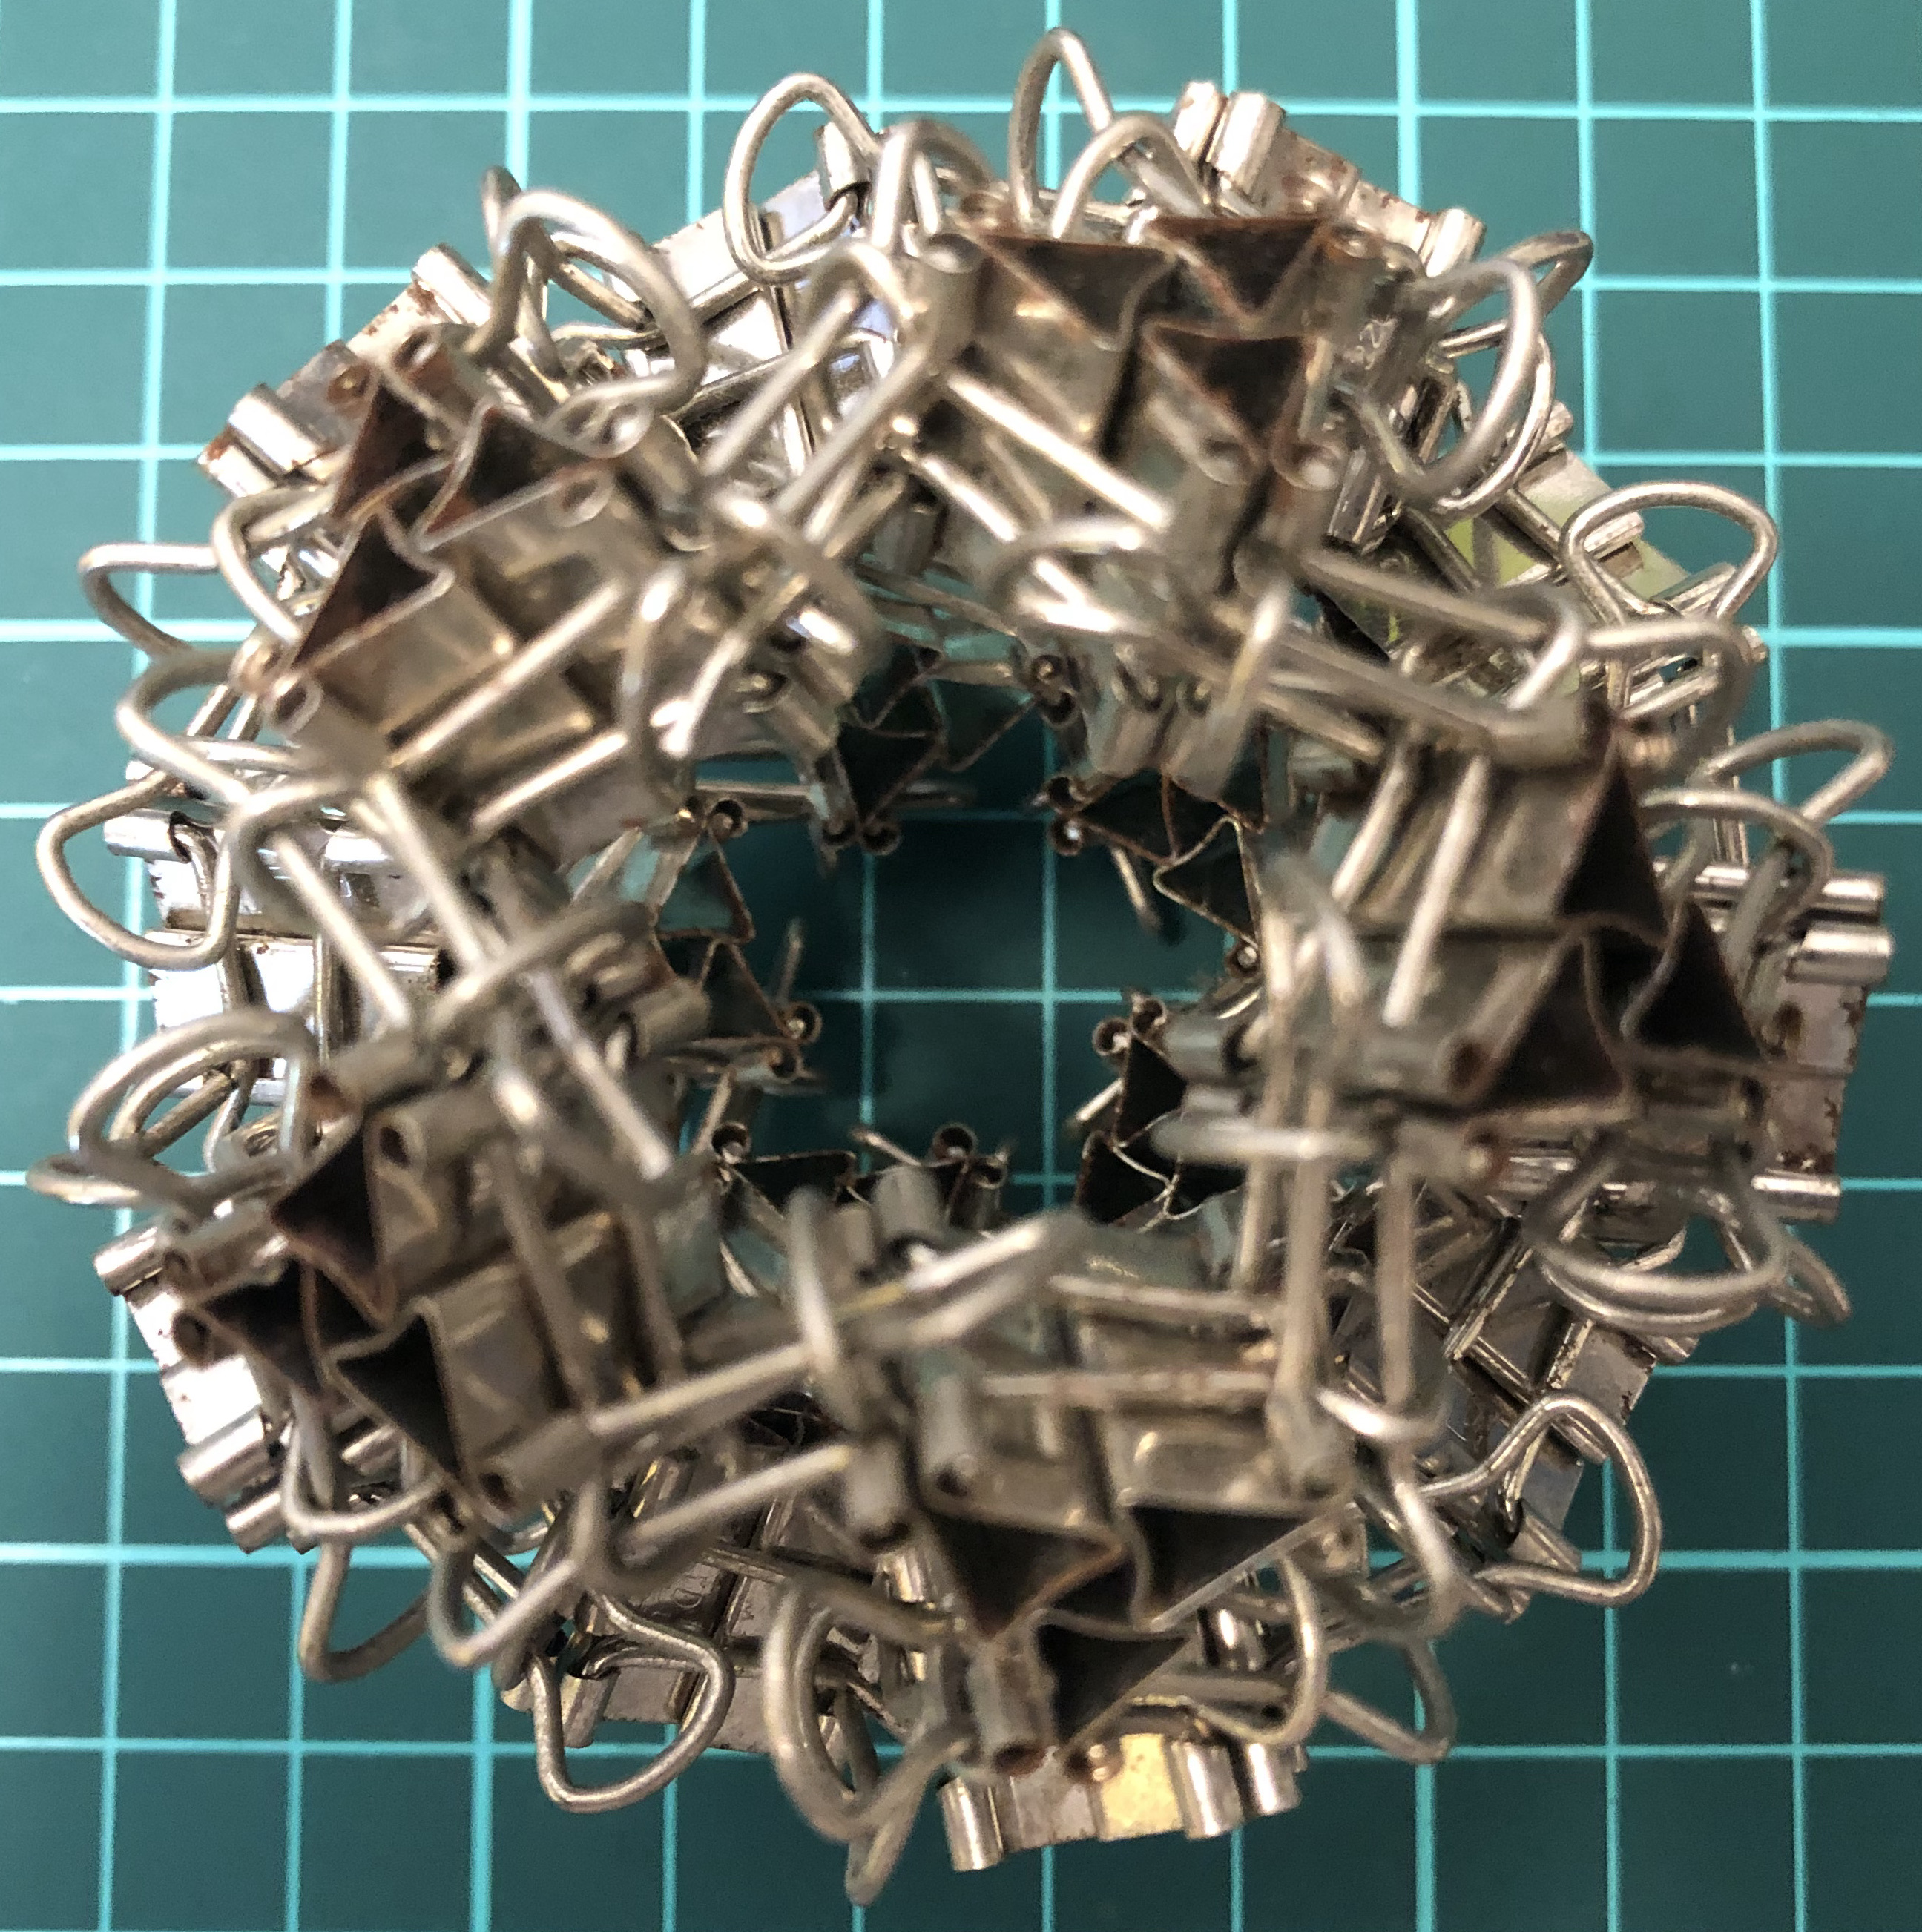 60 clips forming 30 Δ-vertices forming dodecahedron